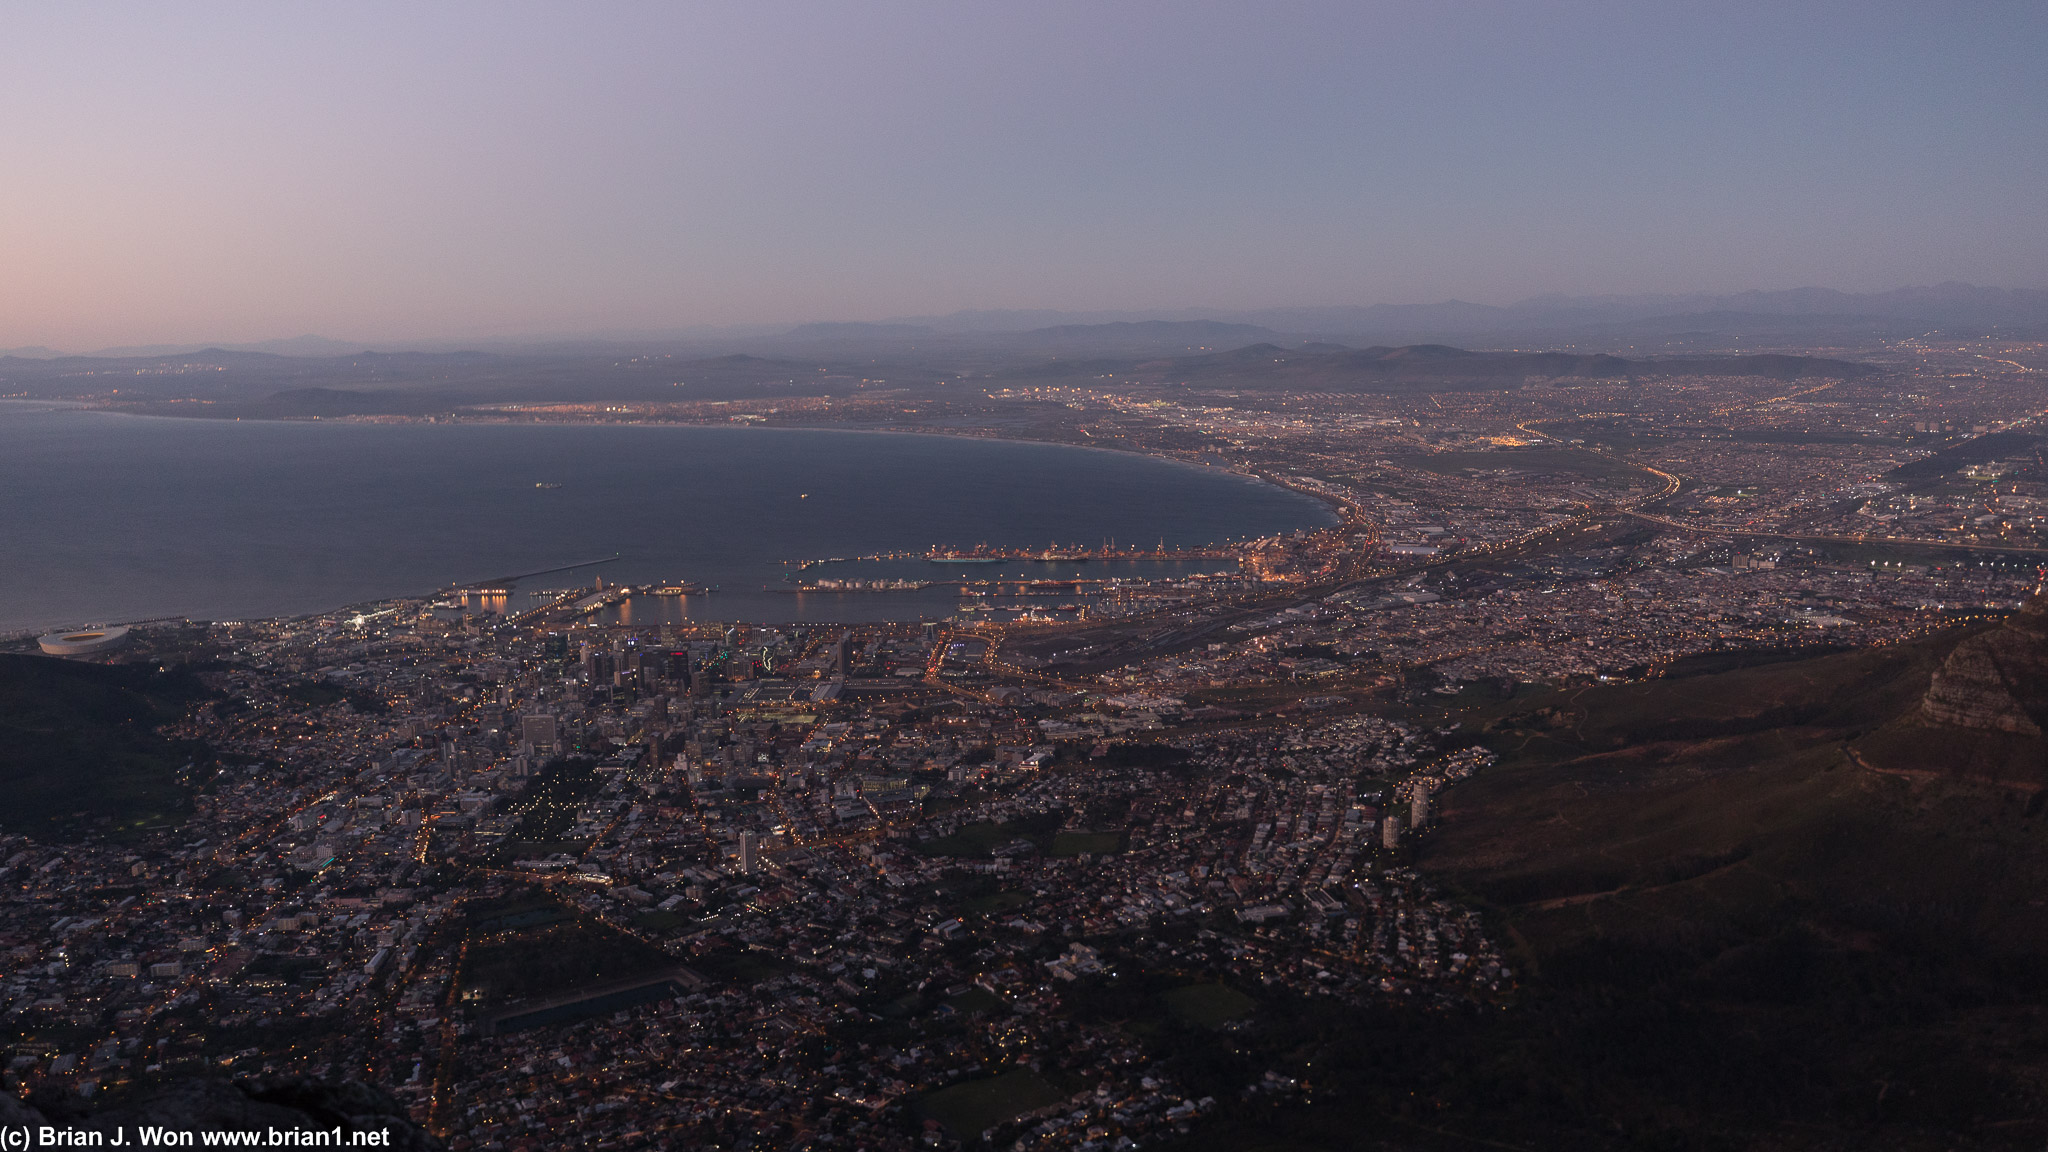 The lights of Cape Town shimmer on to ward off the night.